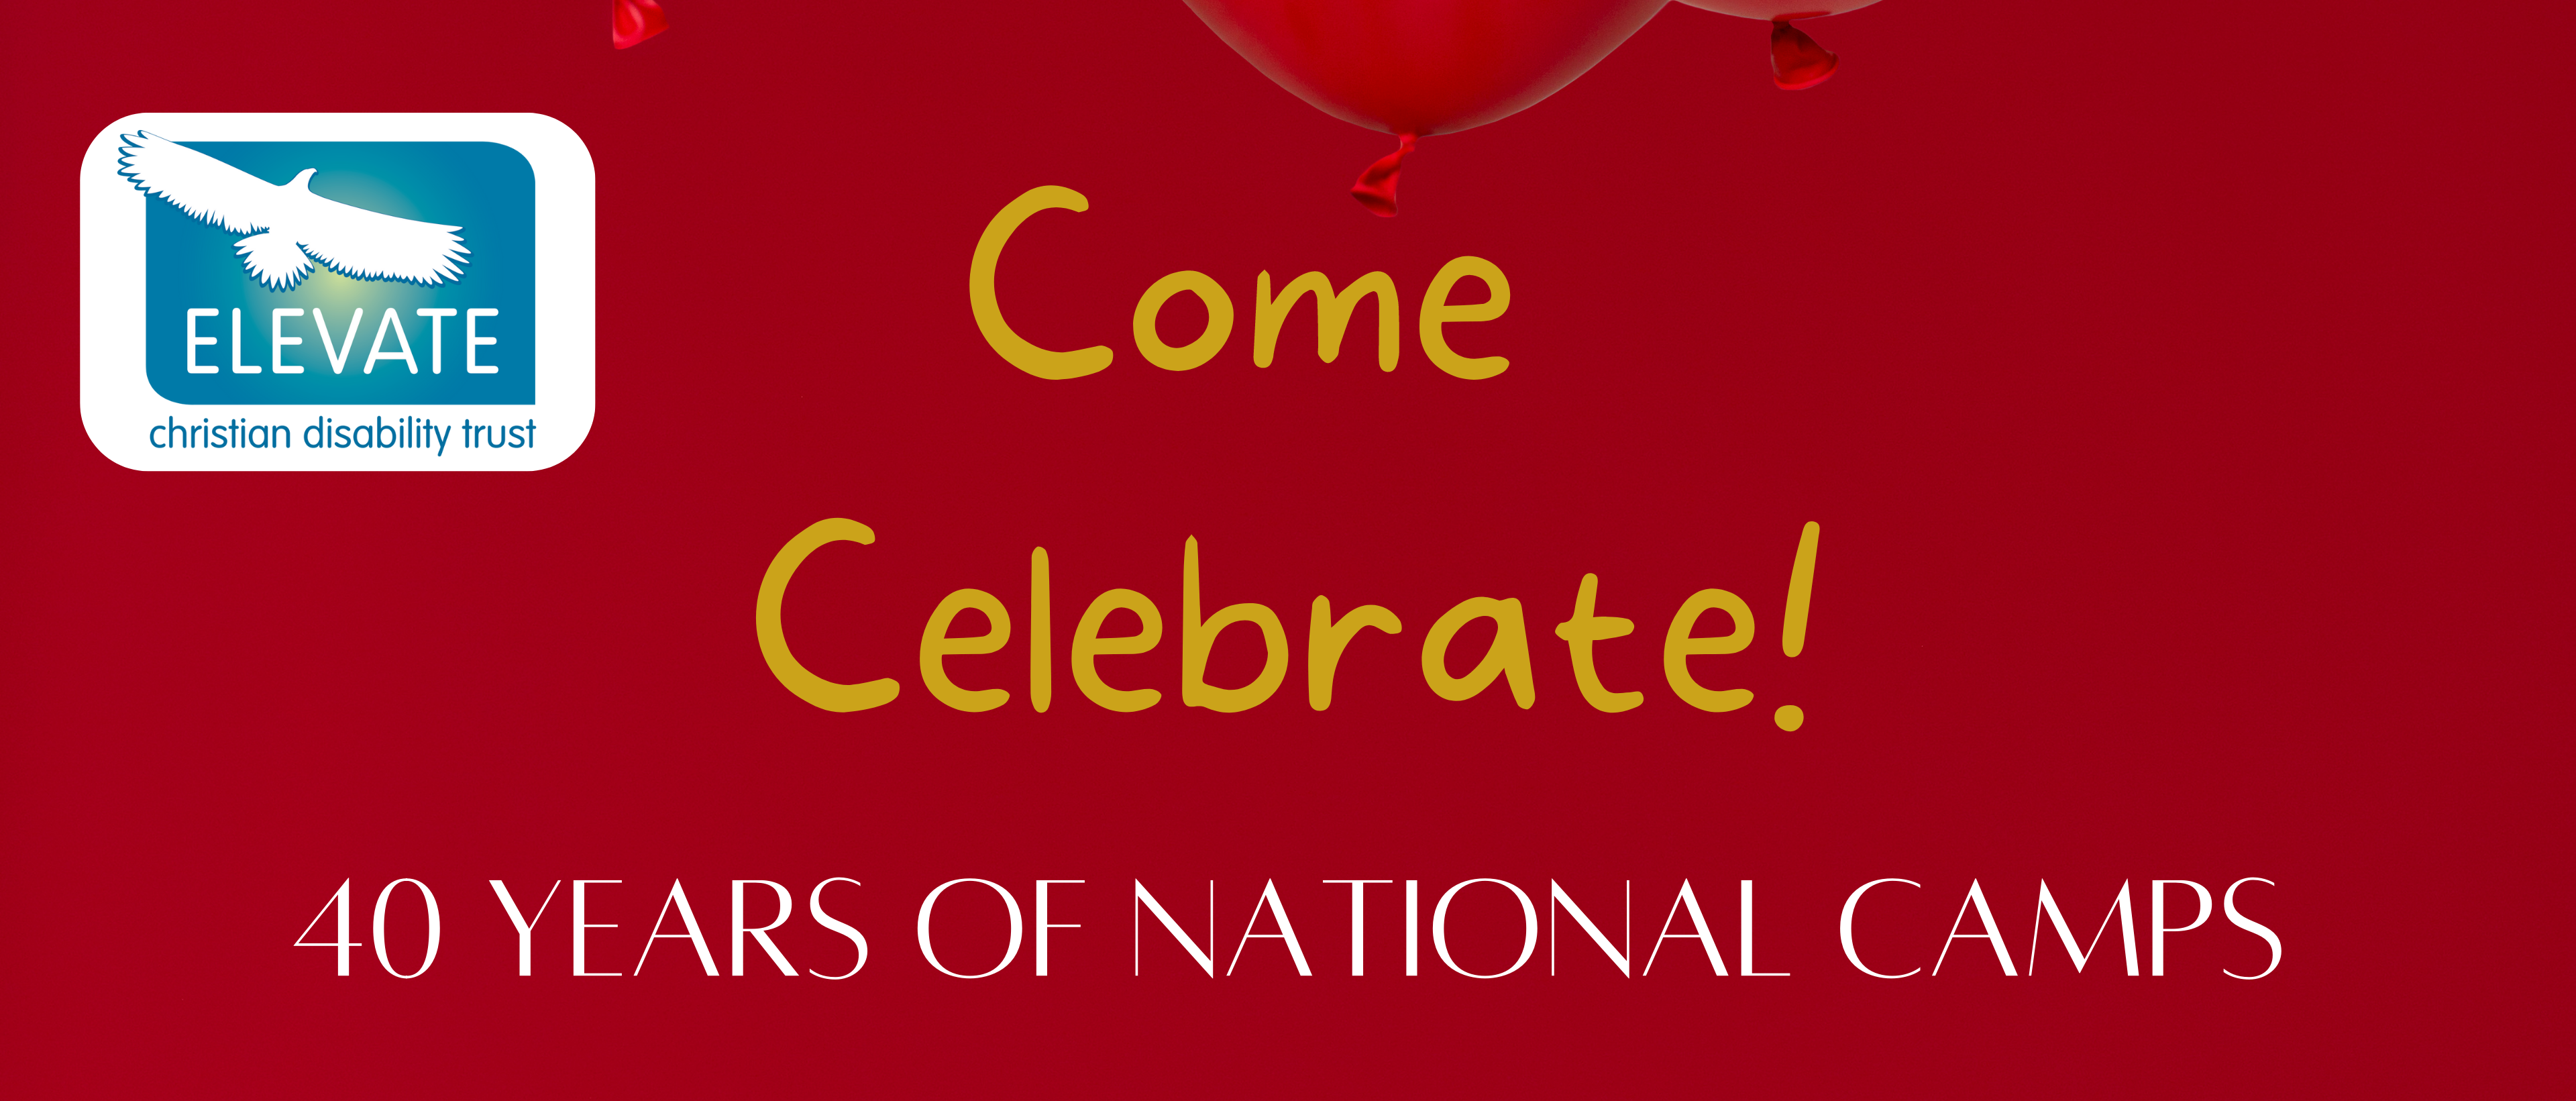 Come Celebrate! 40 years of National Camps